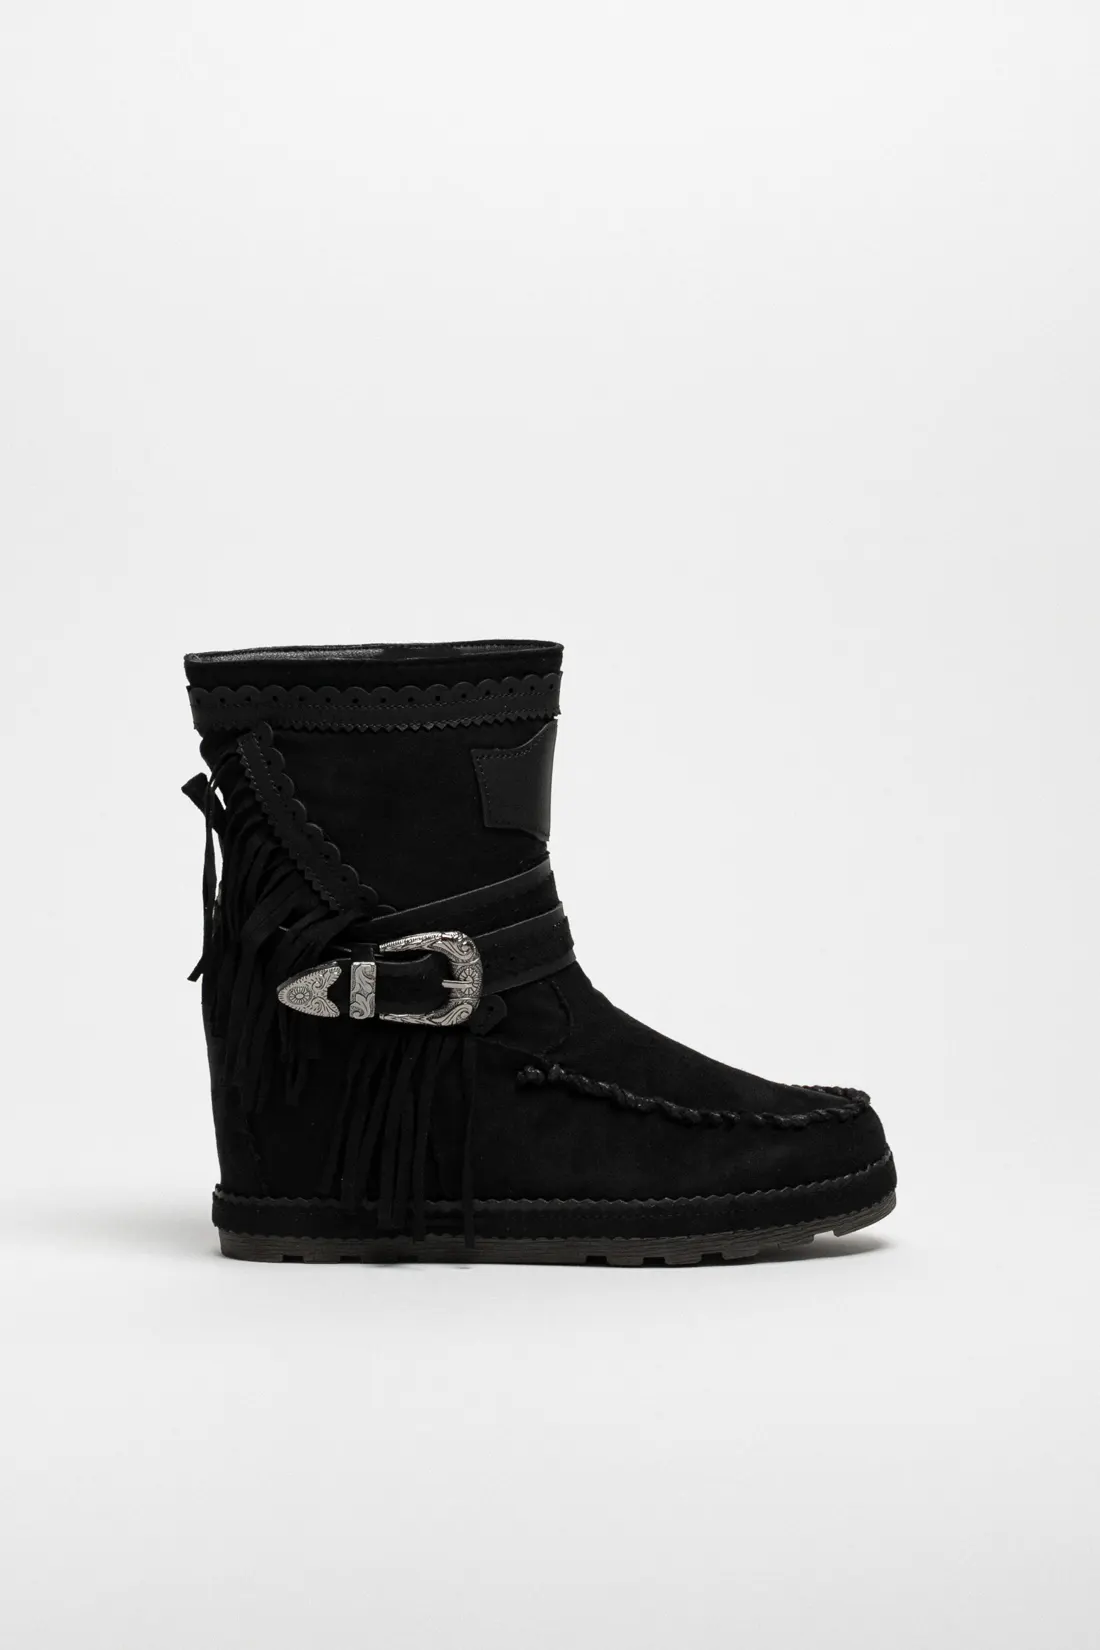 INDIANINI REMIE LOW BOOT - BLACK